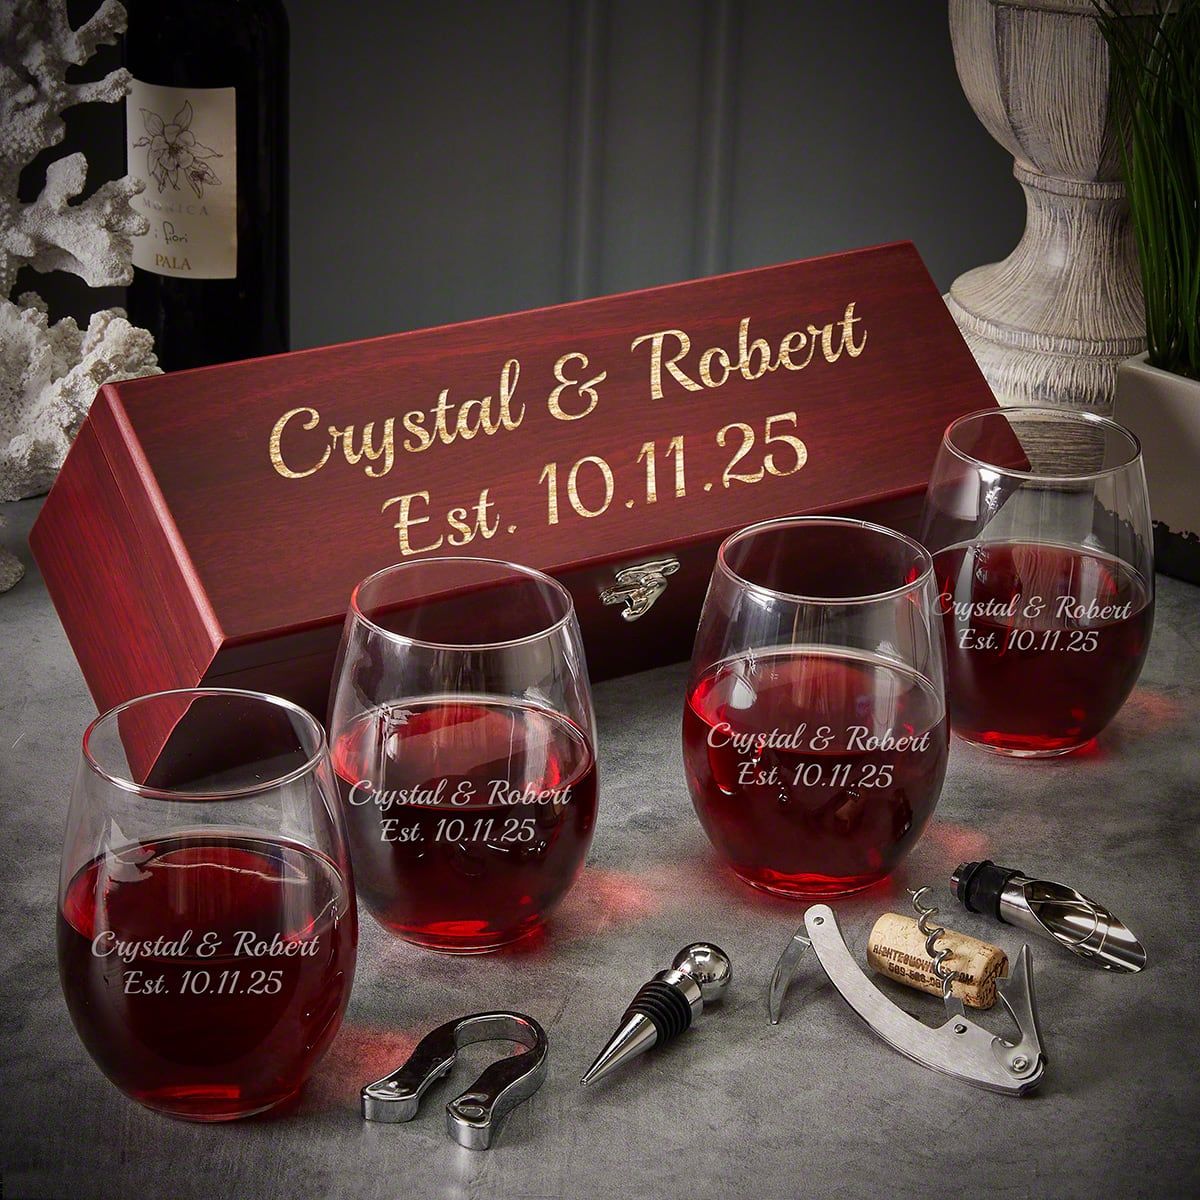 https://images.homewetbar.com/media/catalog/product/p/e/personalized-rose-wood-box-stemless-wine-glass-set-two-lines-of-text-p-10784.jpg?store=default&image-type=image